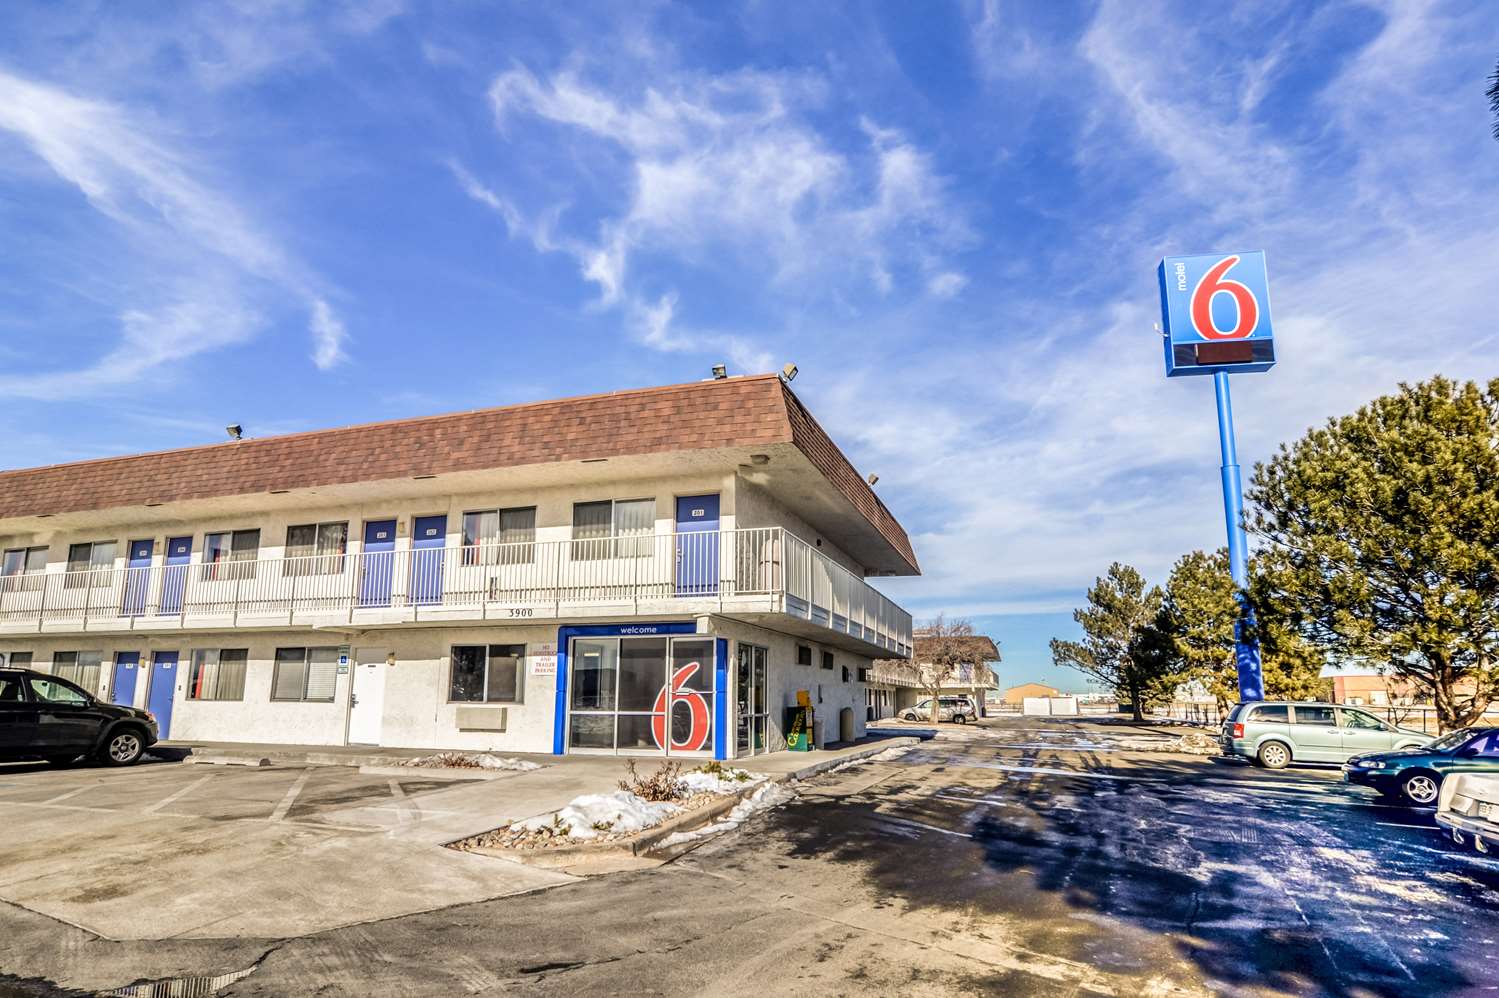 Pet Friendly Motel 6 Fort Collins in Fort Collins, Colorado